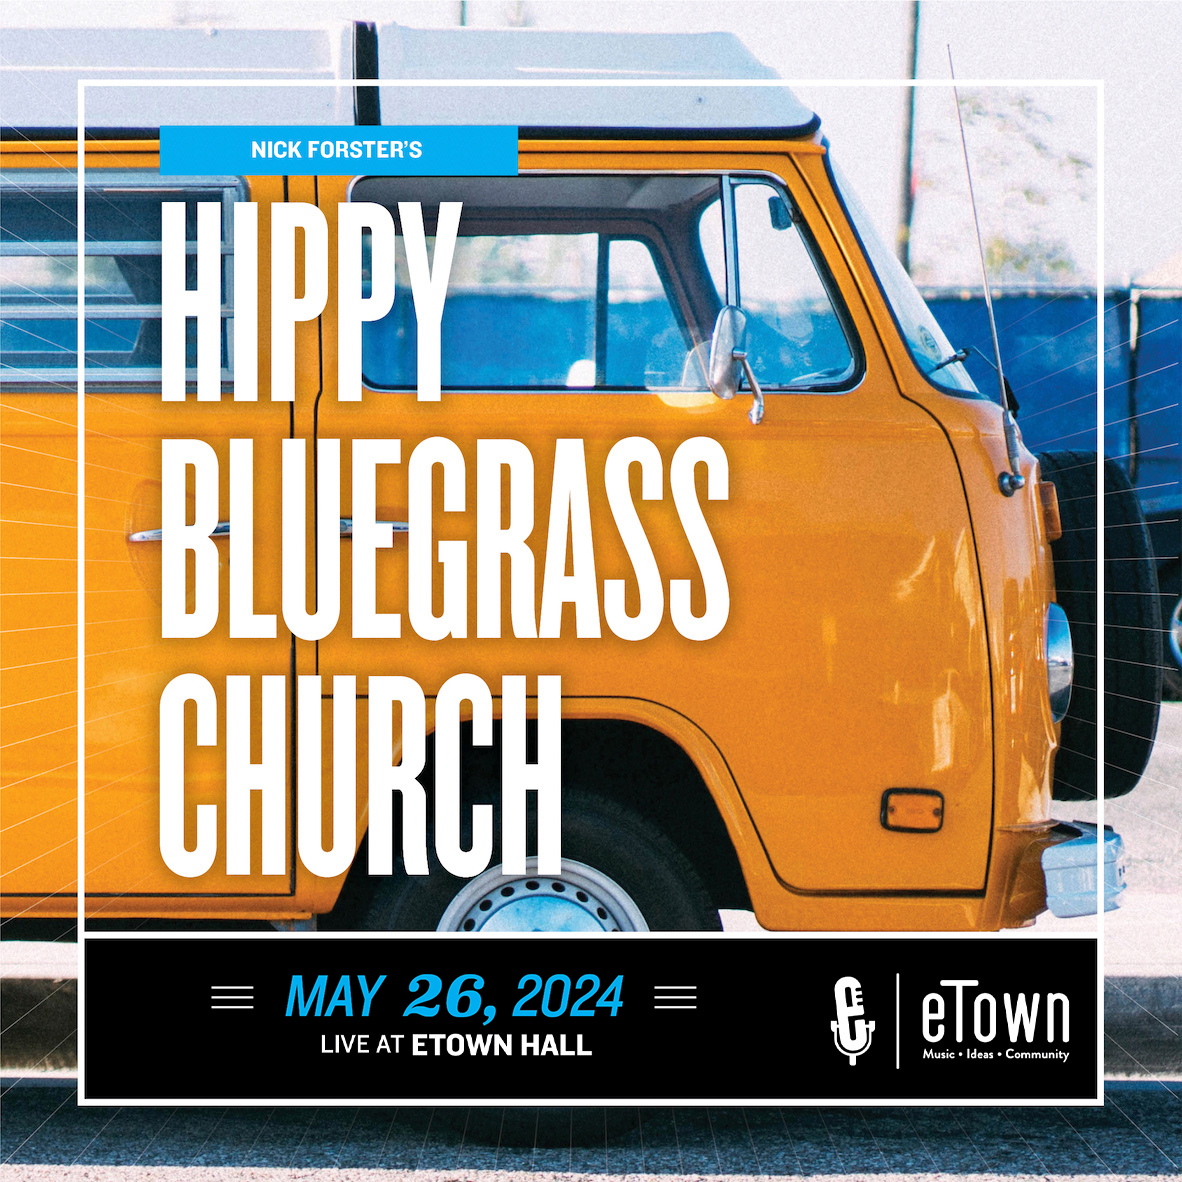 🚨Just Added🚨 Join us at eTown hall on May 26th for a morning of poetry readings, storytelling, community, and of course, some incredible bluegrass music. 🎟️: eventbrite.com/e/888681559467